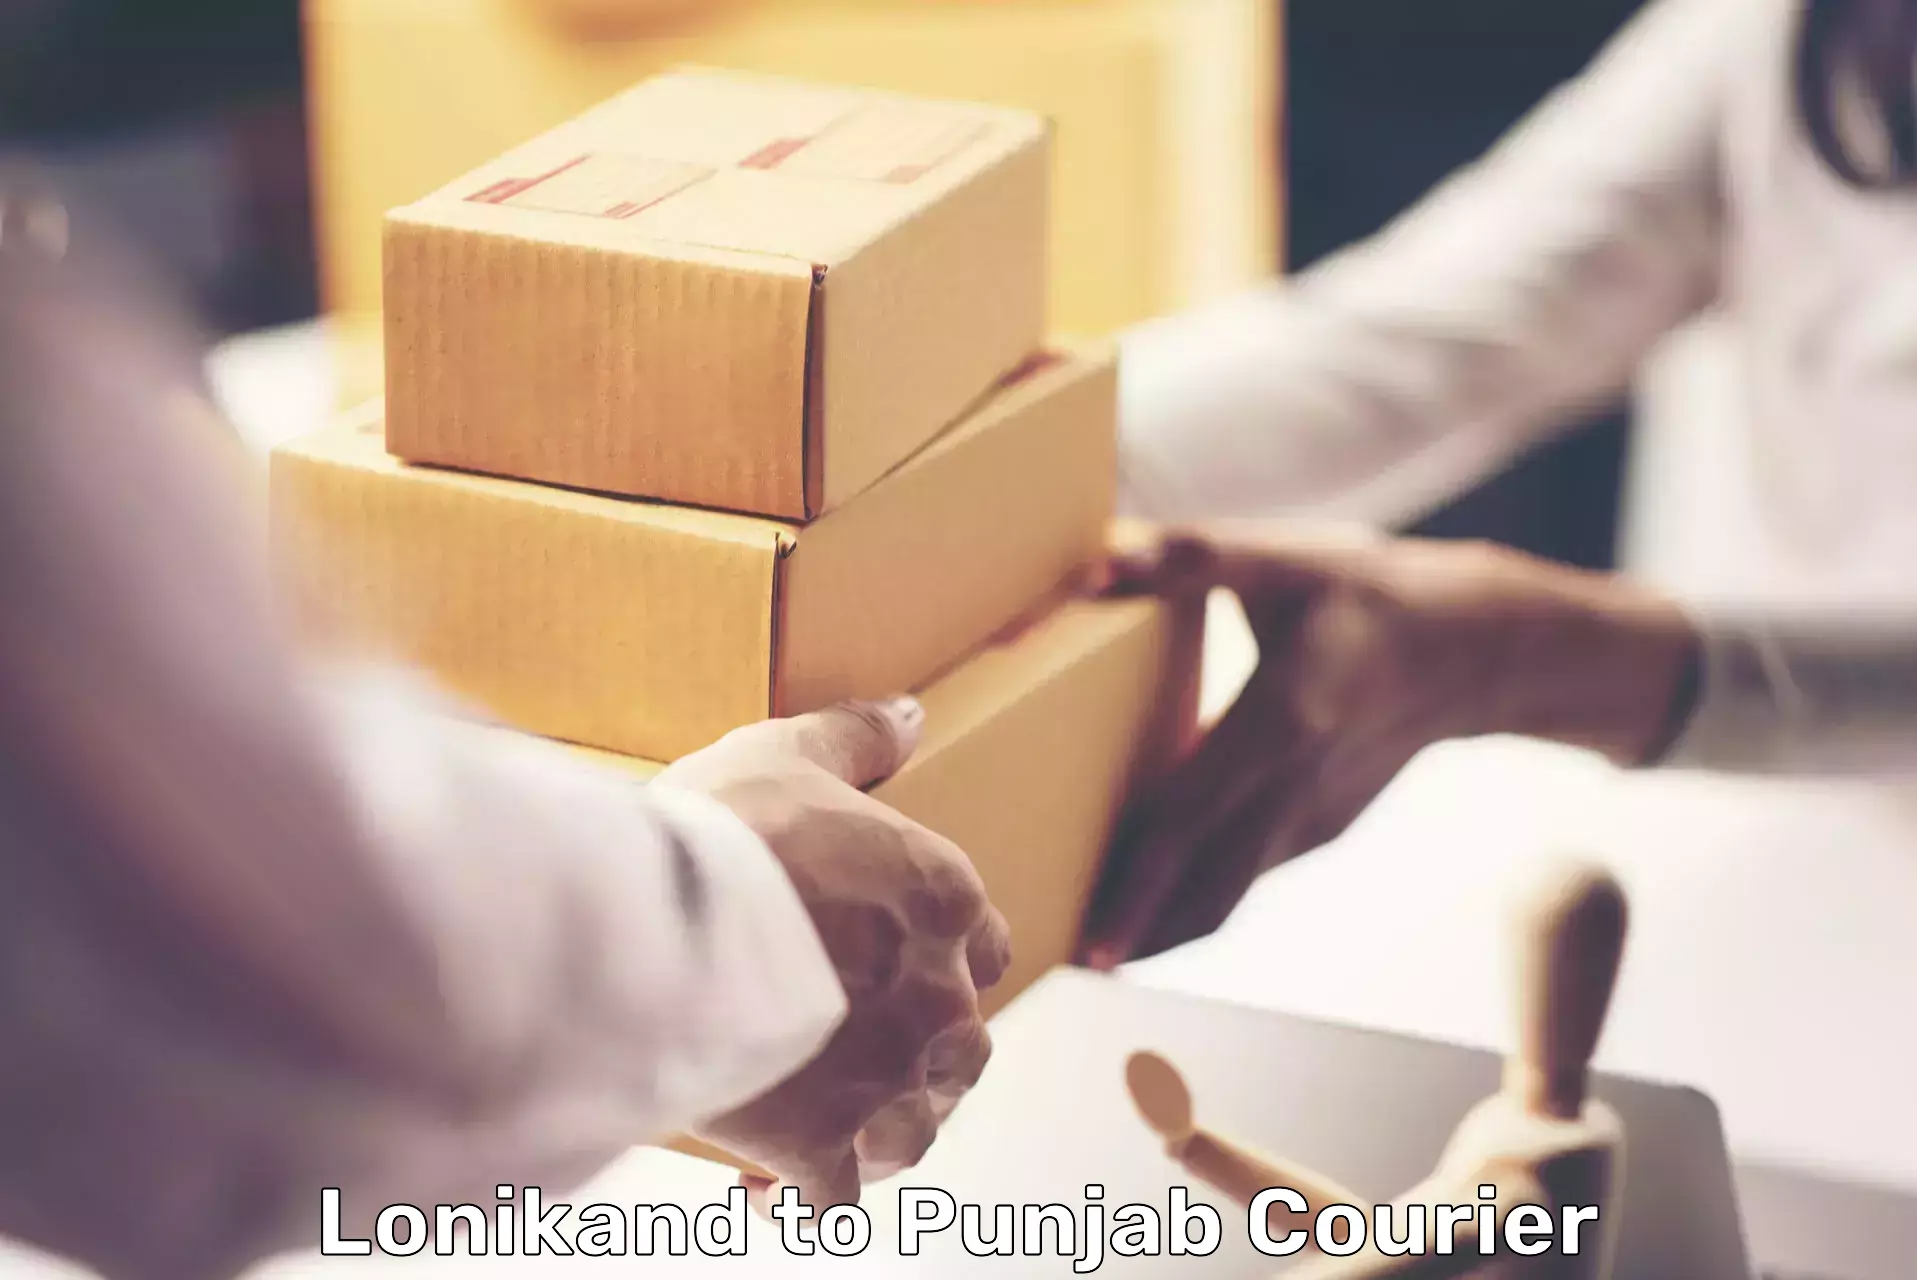 Express delivery network Lonikand to Punjab